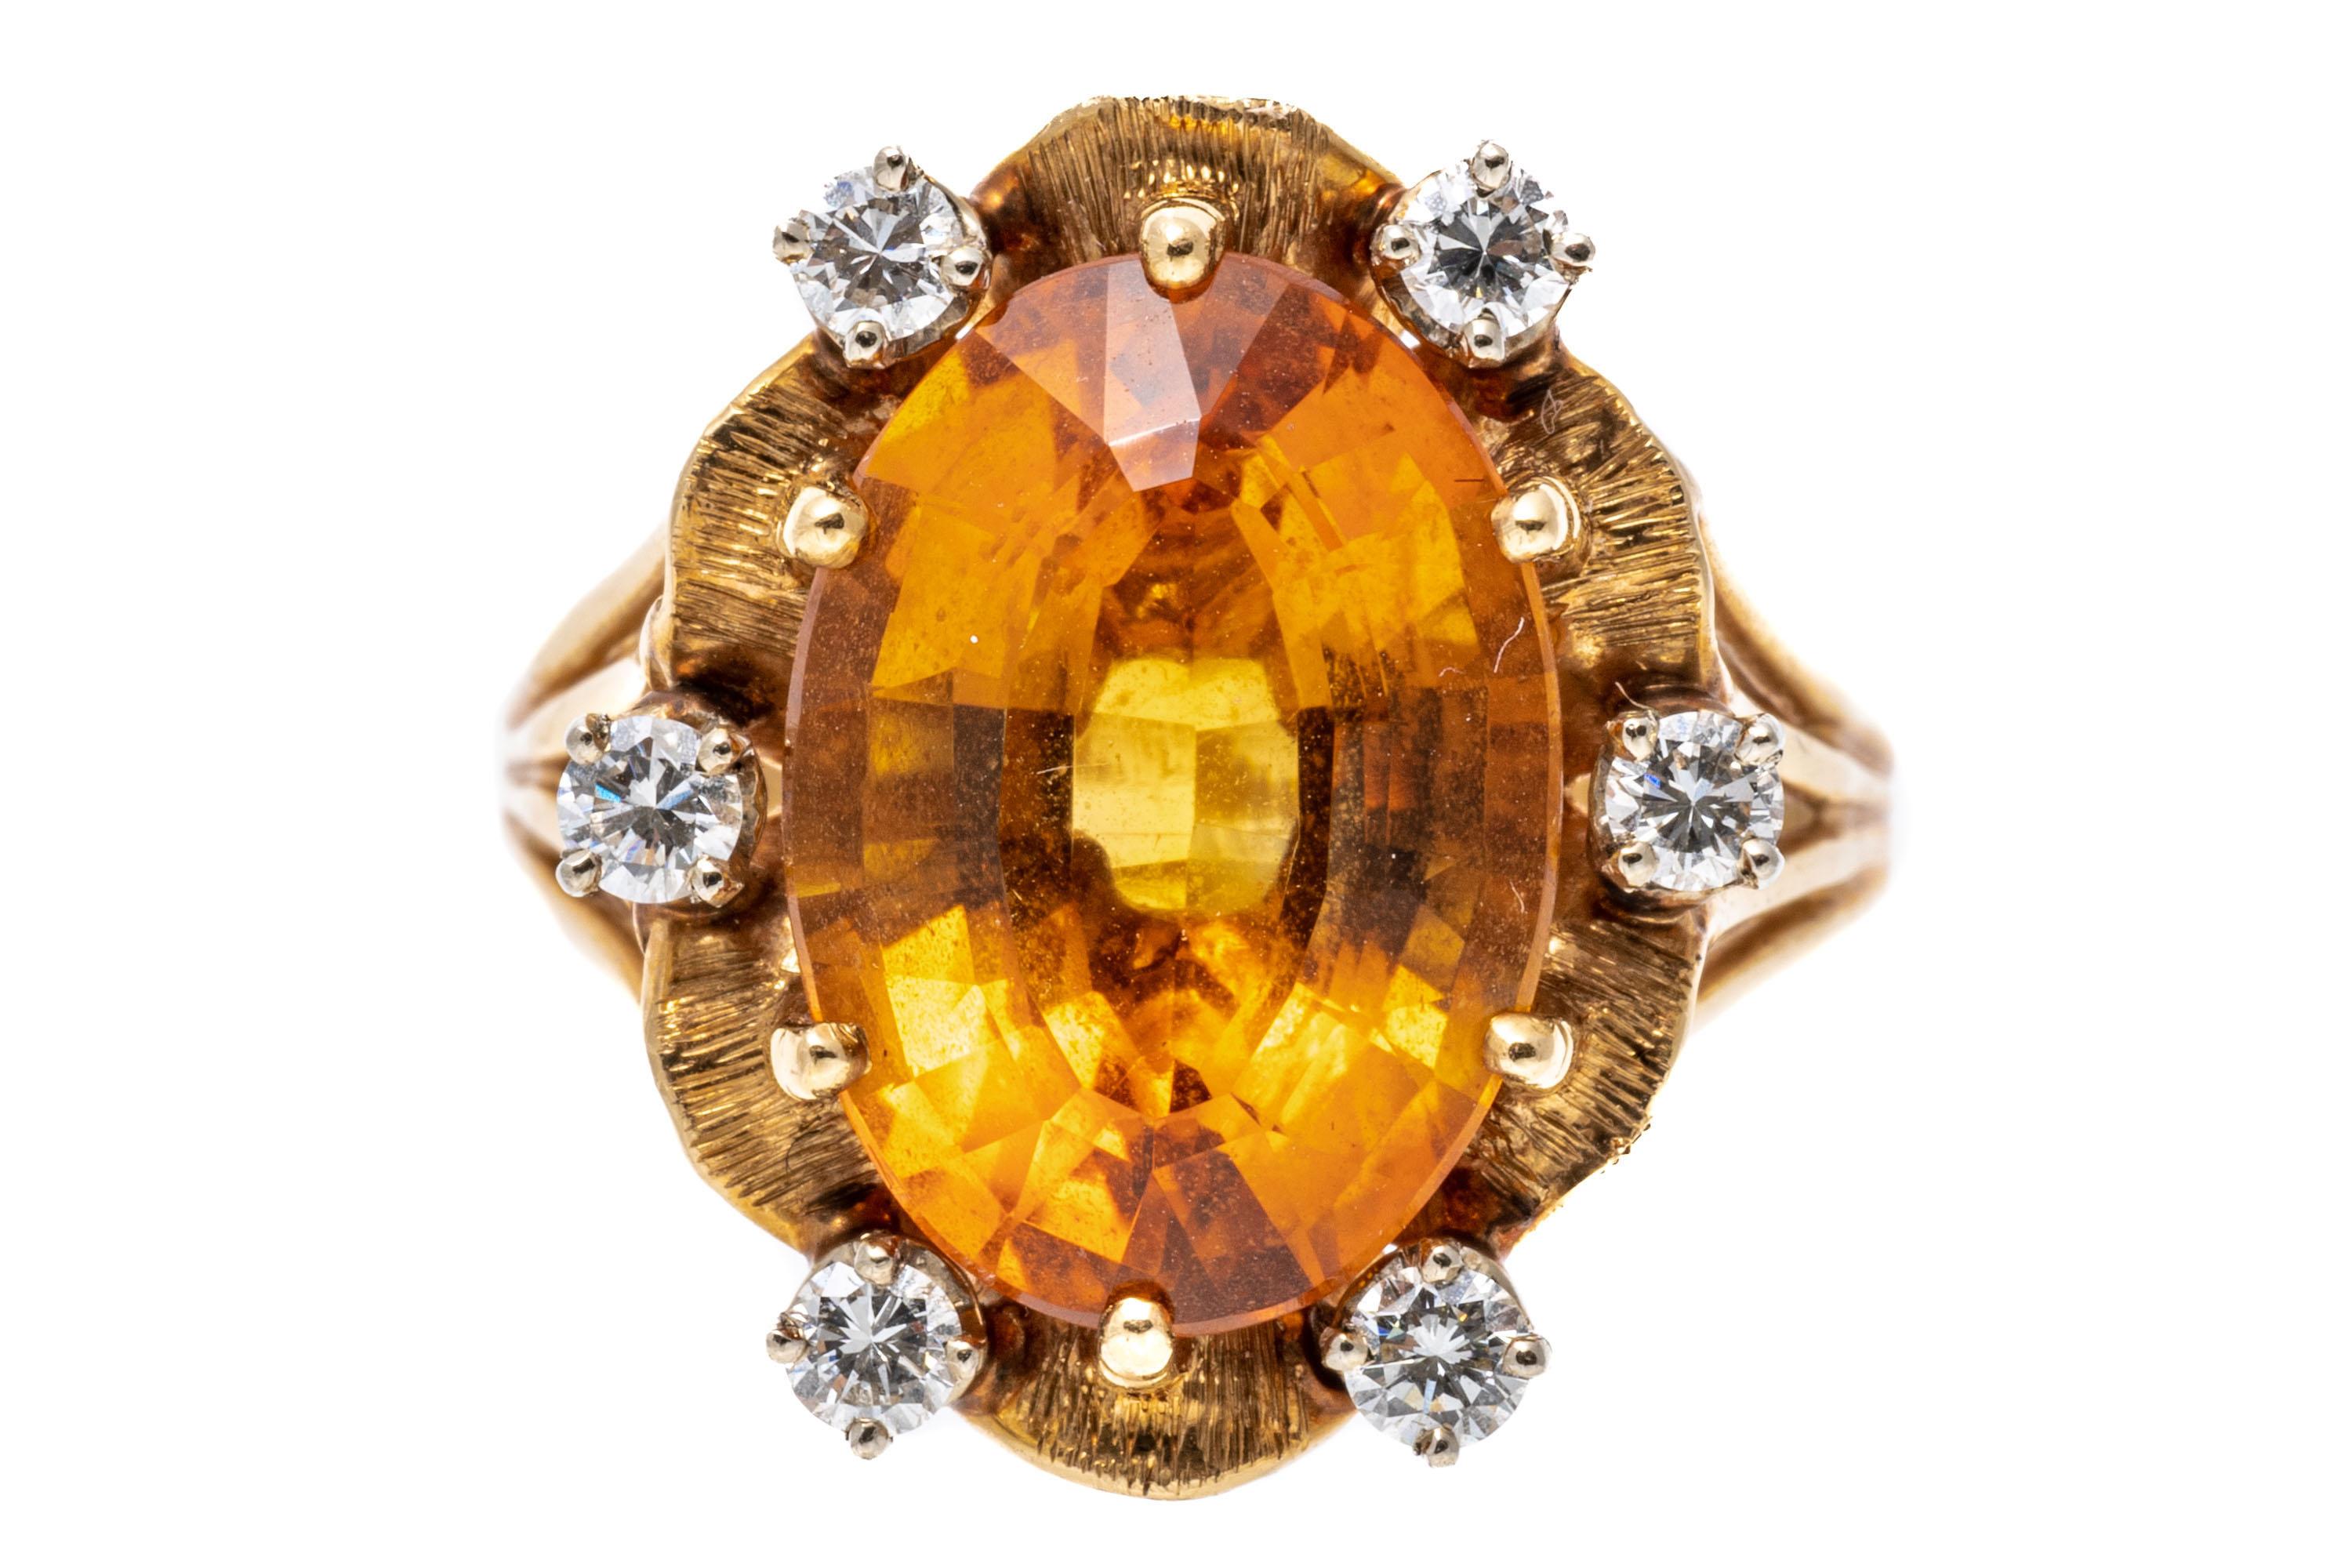 14k Oval Citrine 'App. 5.10 CTS' And Diamond Scalloped Framed Ring For Sale 2